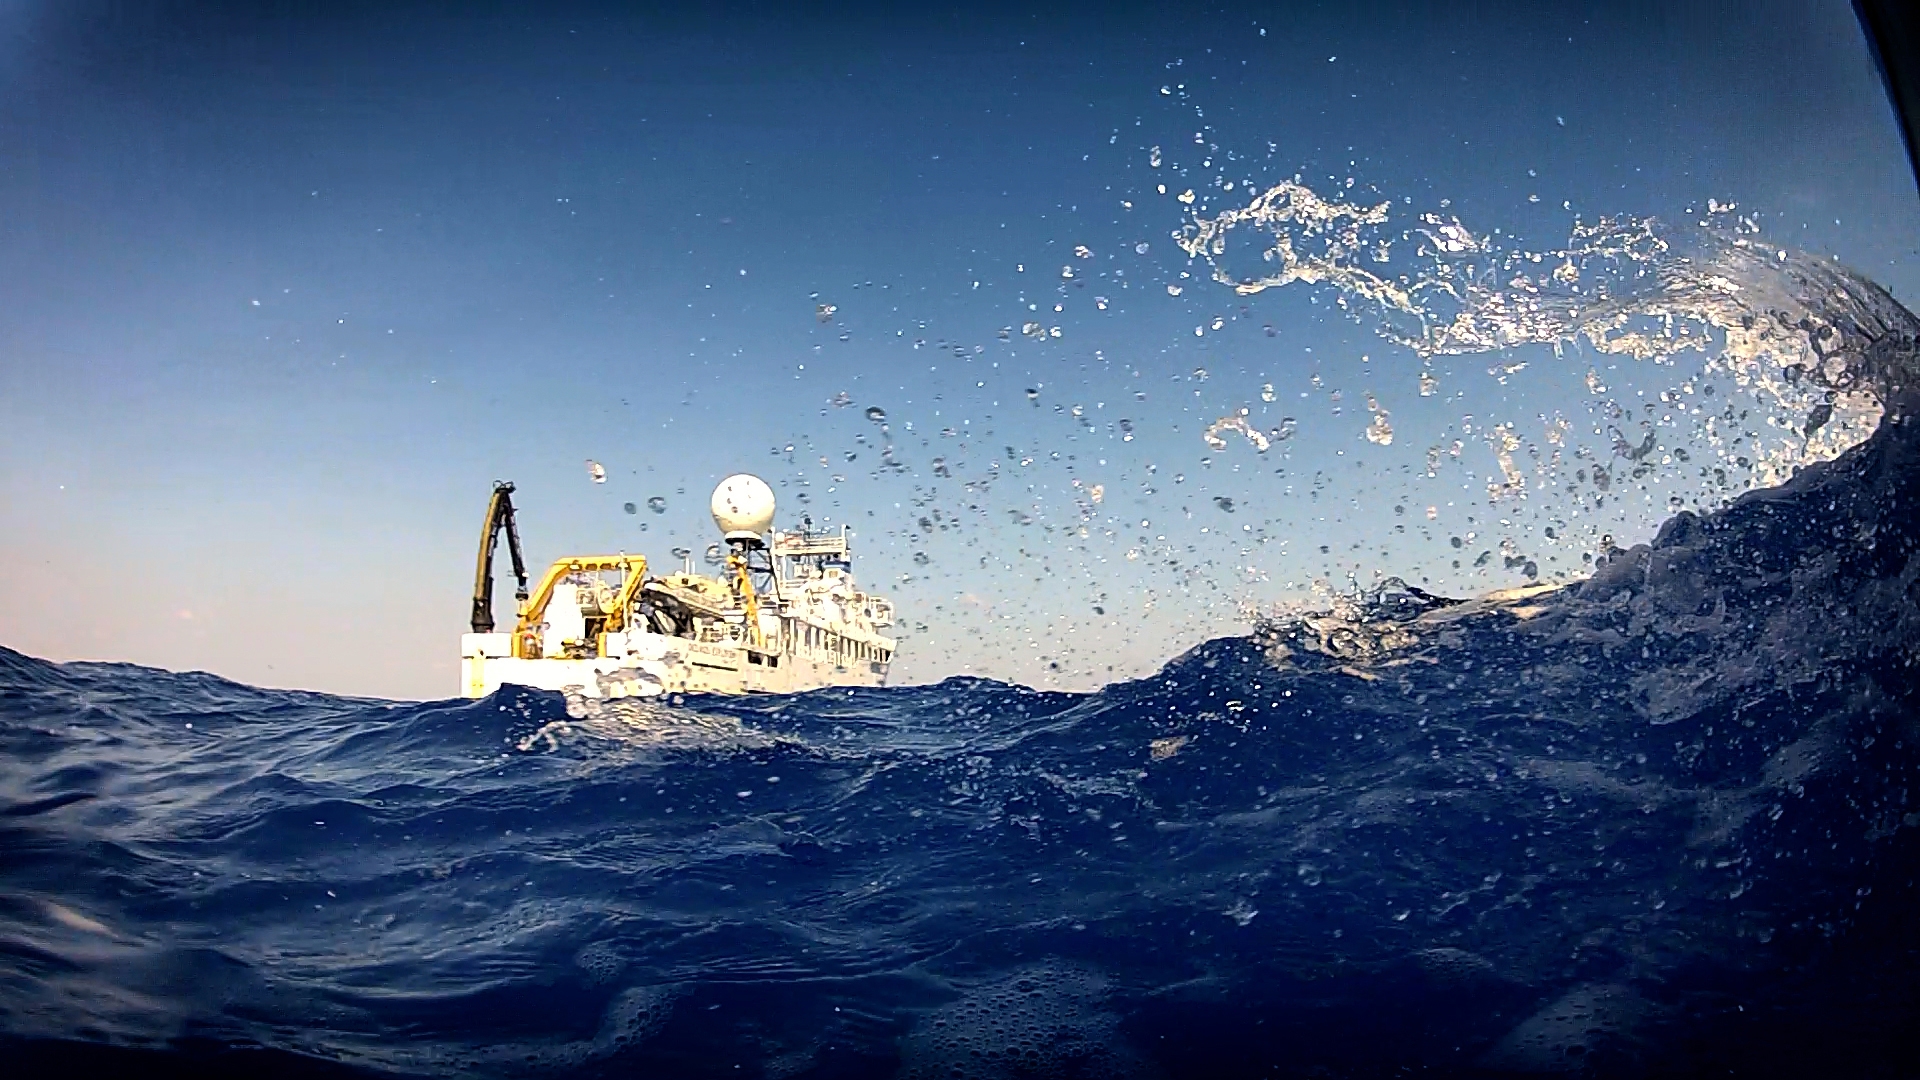 Noaa Ship Okeanos Explorer Conducts Operations In The Northern Gulf Of